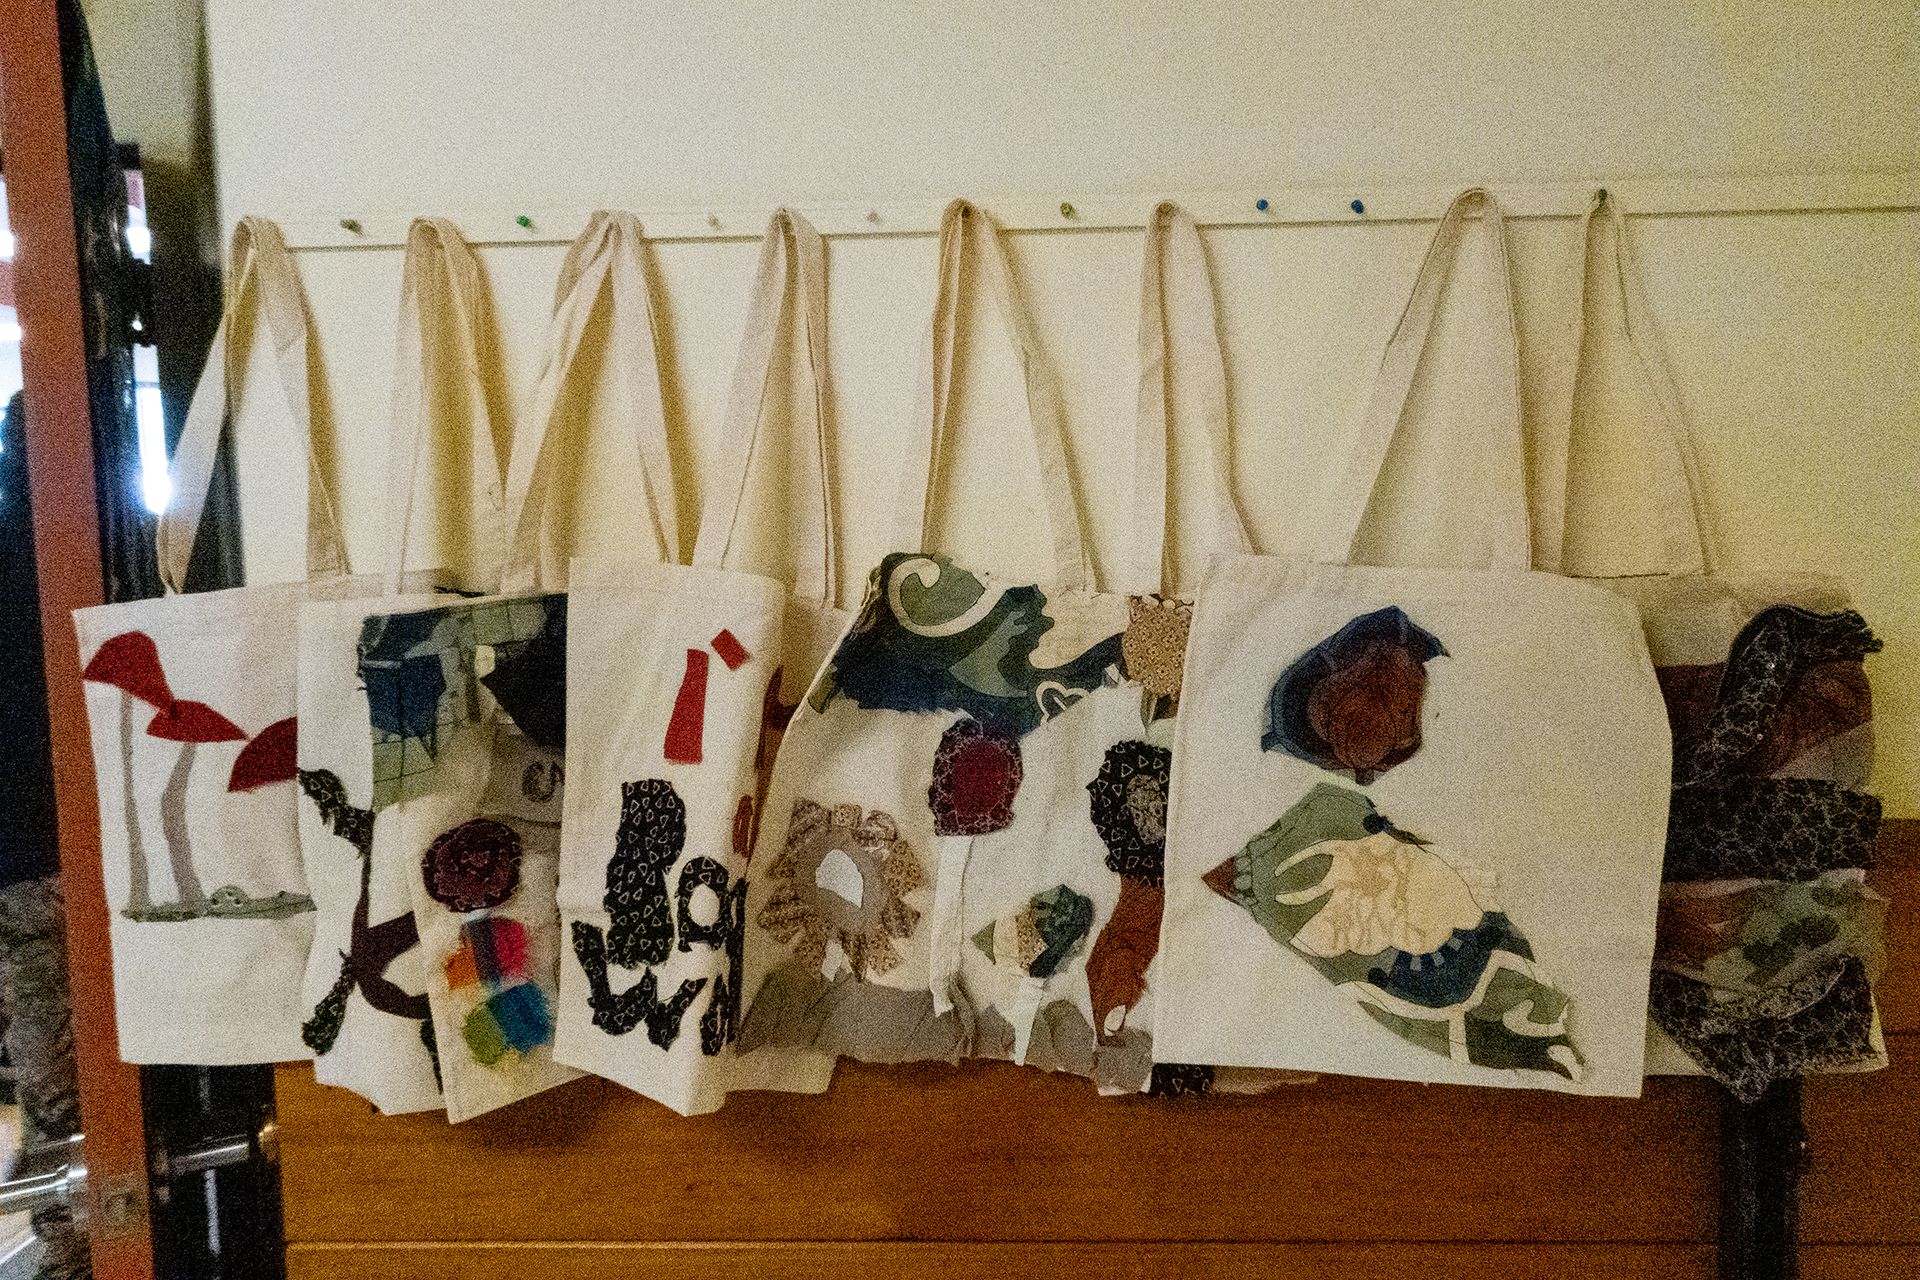 tote bags with fabric designs sewn and glued onto them